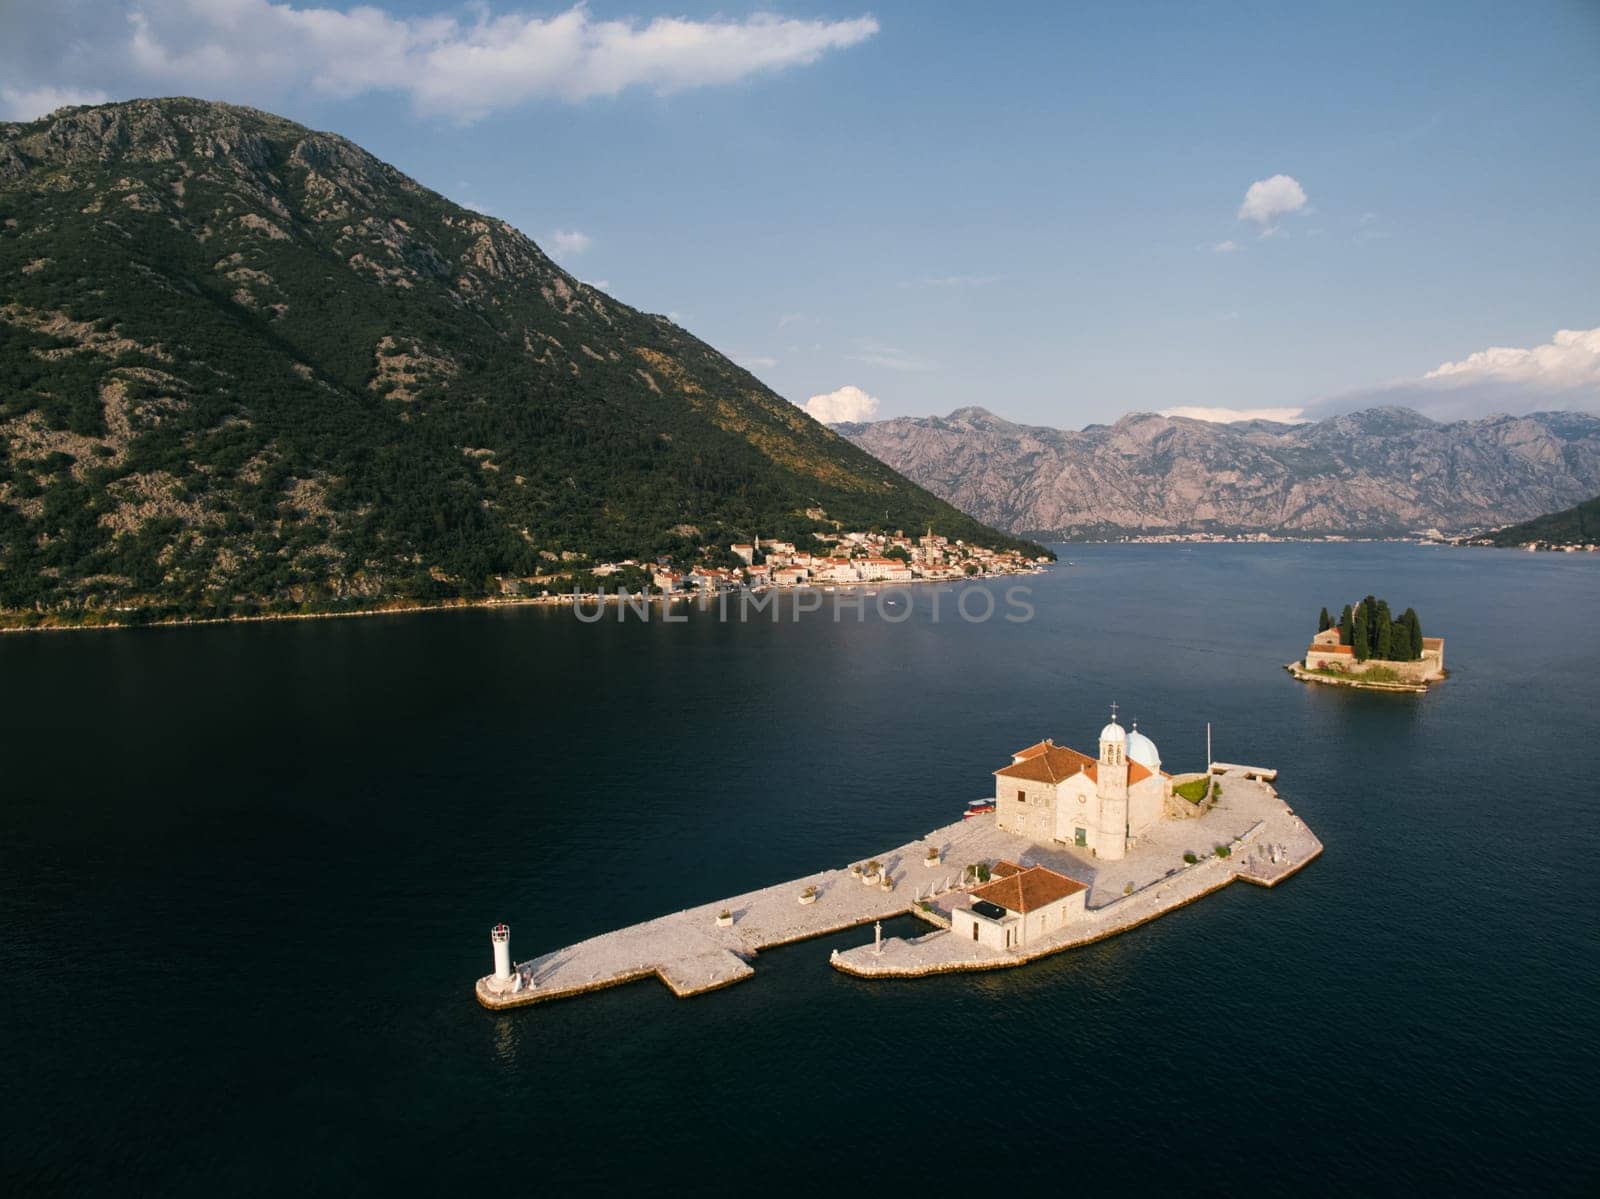 Church of Our Lady on the Rocks on a small artificial island in the Bay of Kotor. Montenegro. Aerial view. High quality photo